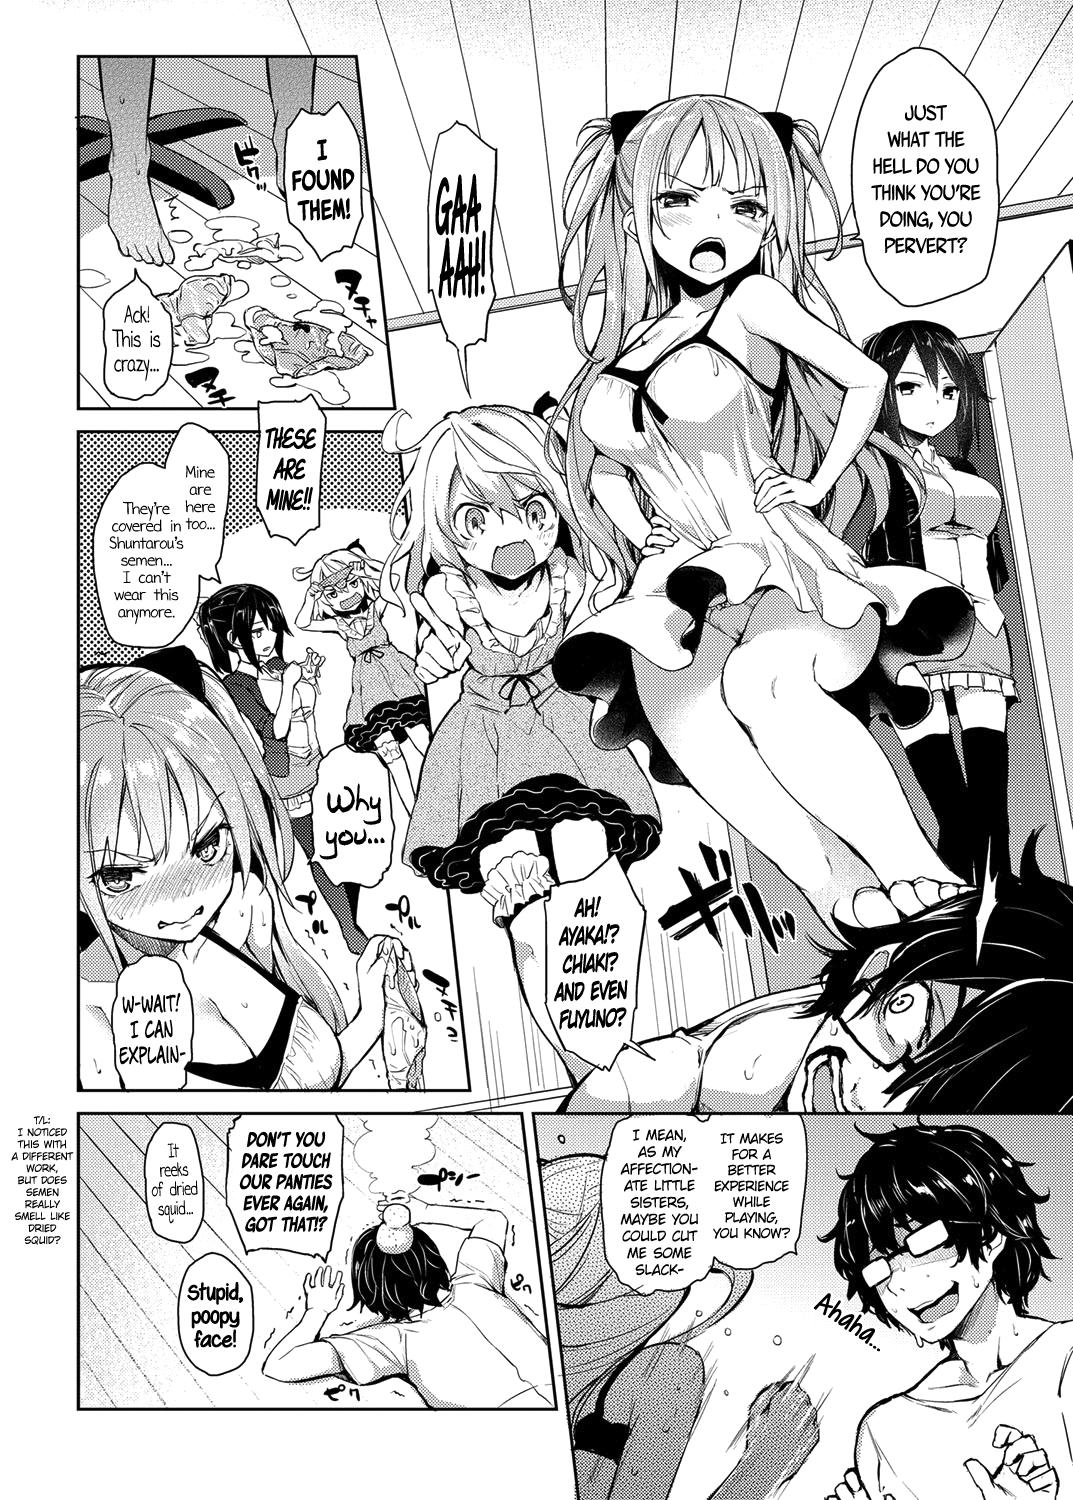 Bathroom Ane Taiken Shuukan | The Older Sister Experience for a Week Close - Page 2